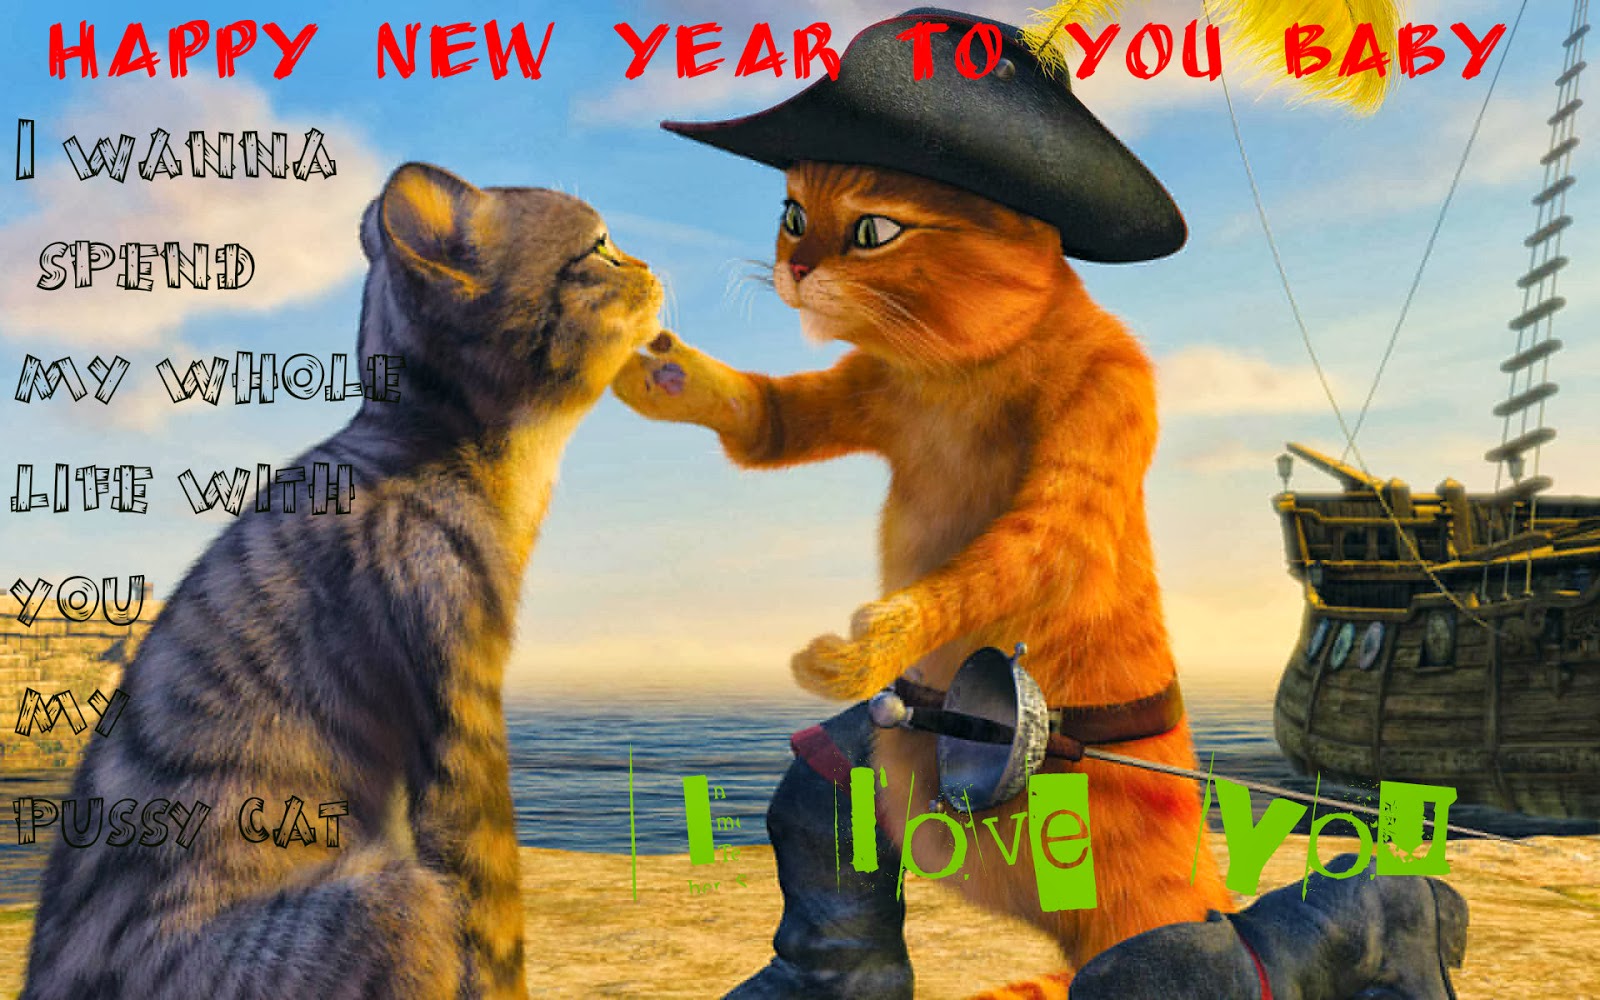 New Year 2015 Quotes, New Year Advanced Wishes 2015 « All In One  best wishes quotes new year 2015